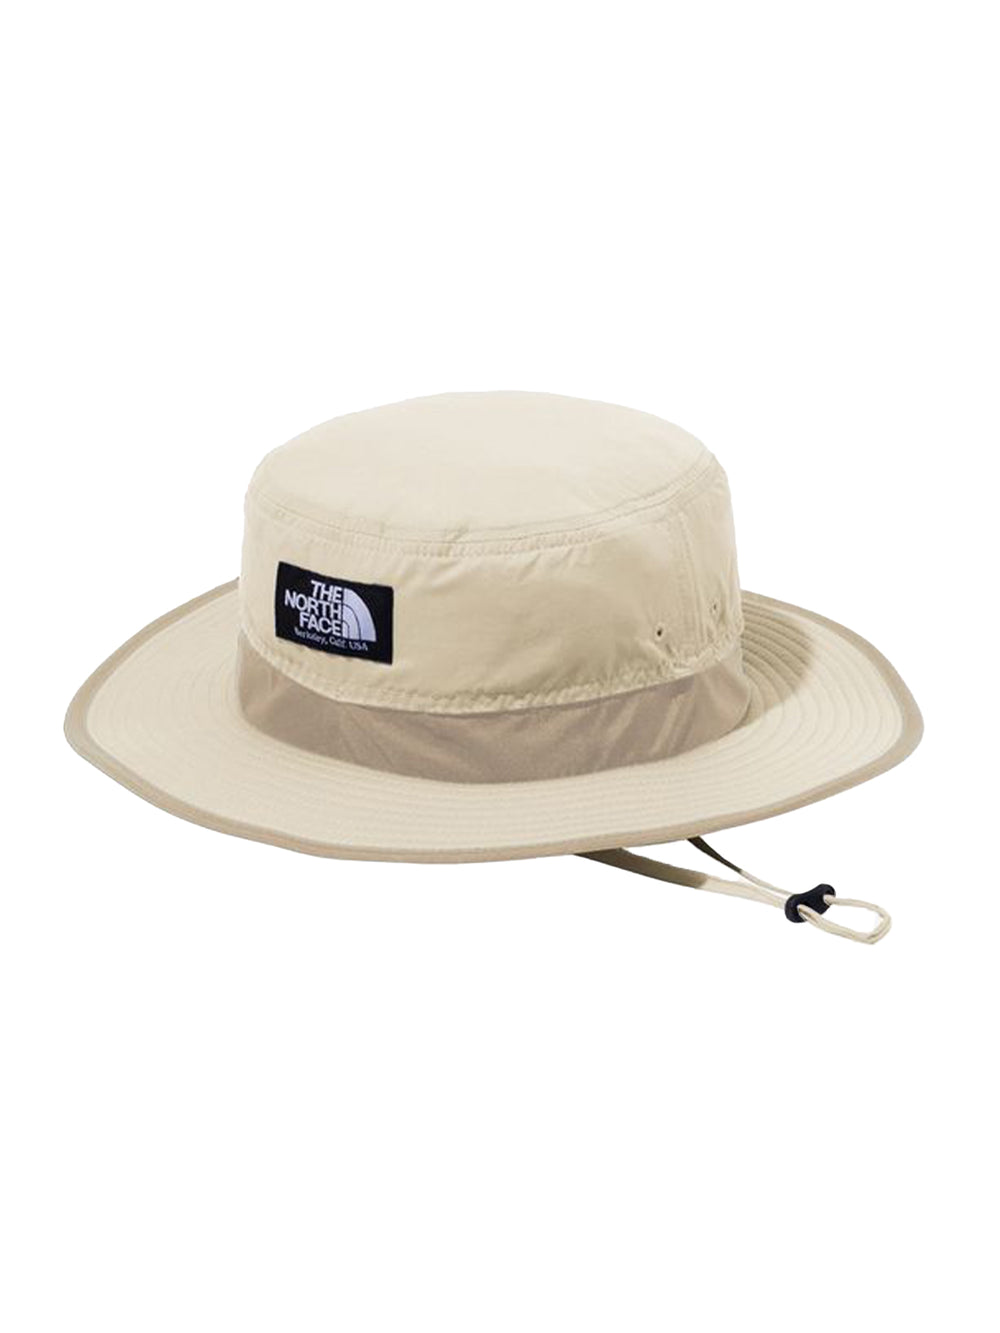 [THE NORTH FACE] Horizon Hat / The North Face Unisex Outdoor UV Protection UV Protection Sunburn NN02103 23SS